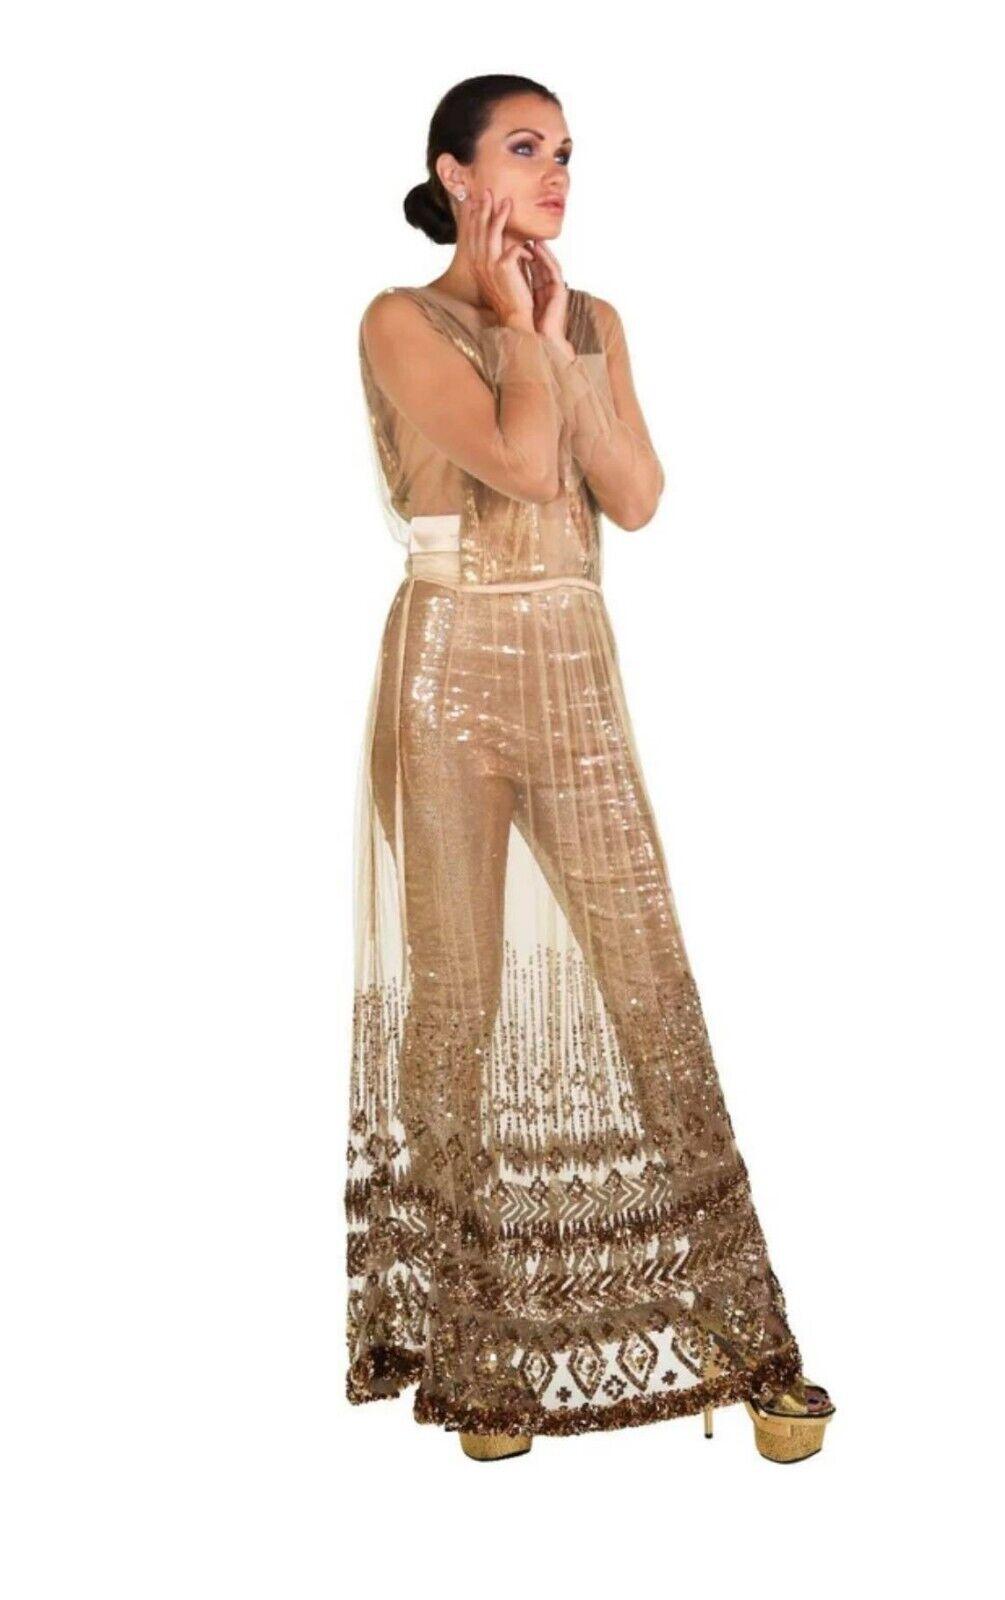 New Tom Ford Nude Embellished Chiffon Dress w/ Gold Sequin Pants 38 - 2 For Sale 7